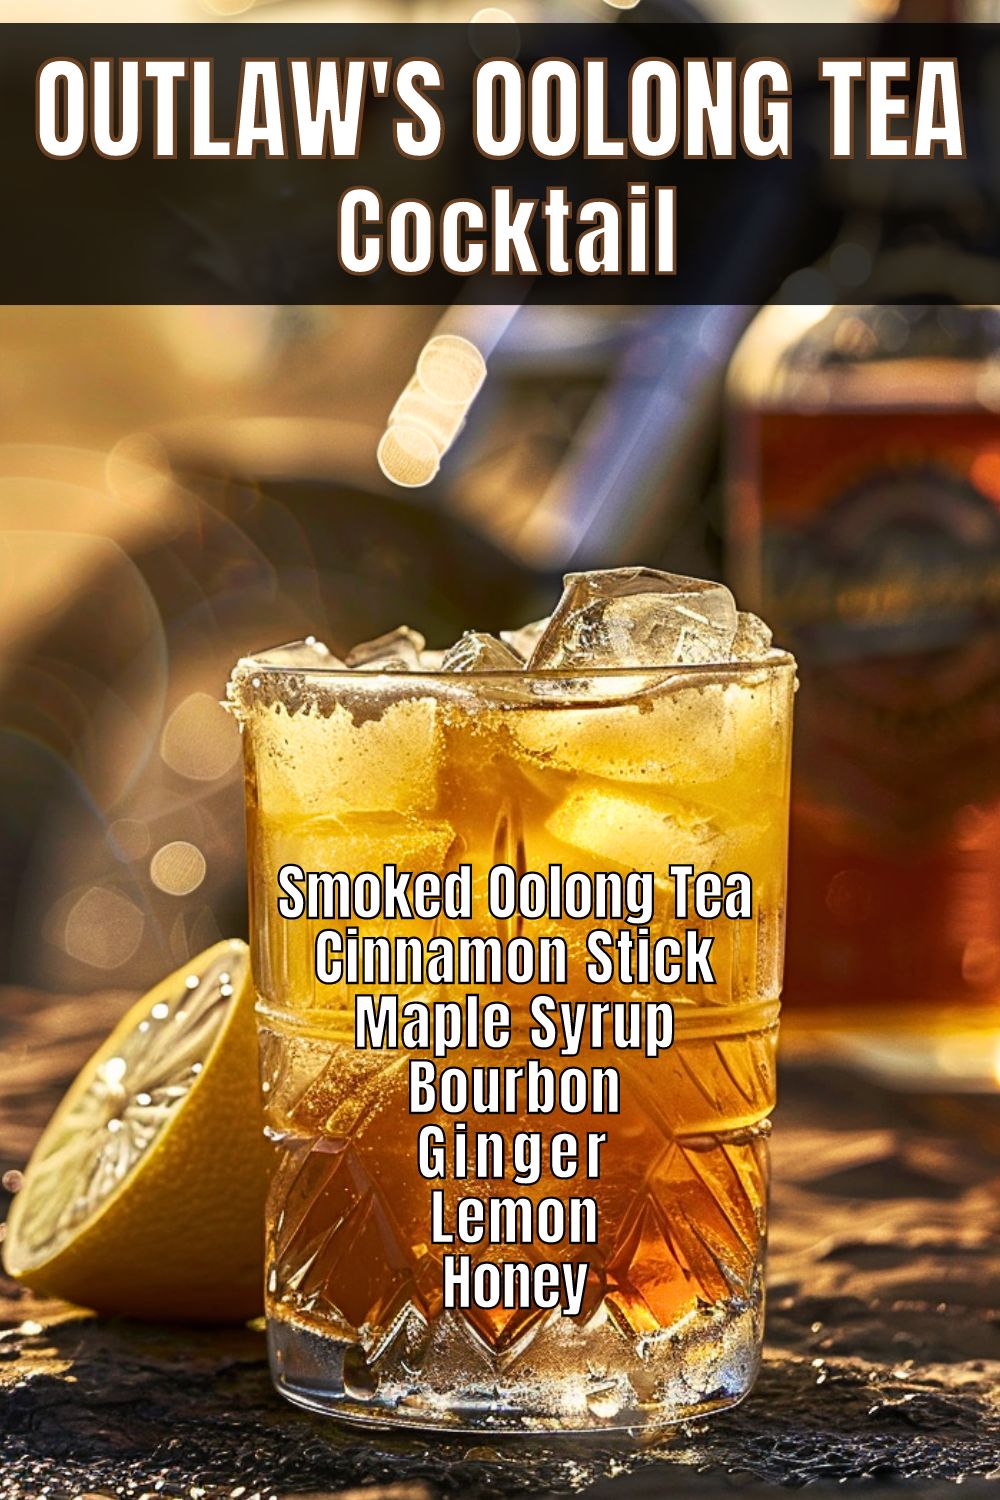 Outlaw's Oolong Tea Cocktail